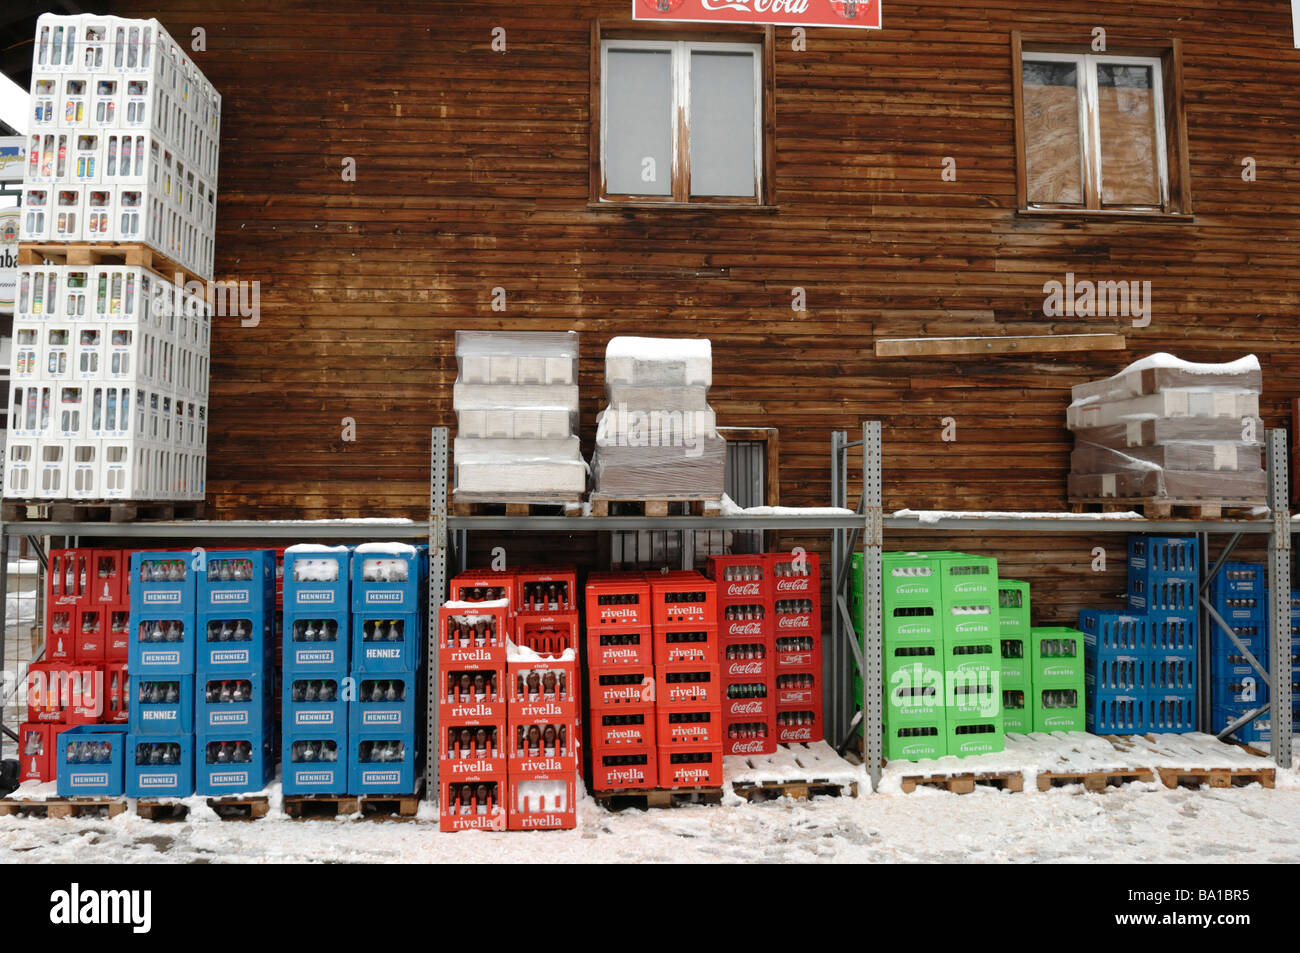 Crates of empty beer and drink bottles out side a snowy bar in the Swiss Alps Stock Photo